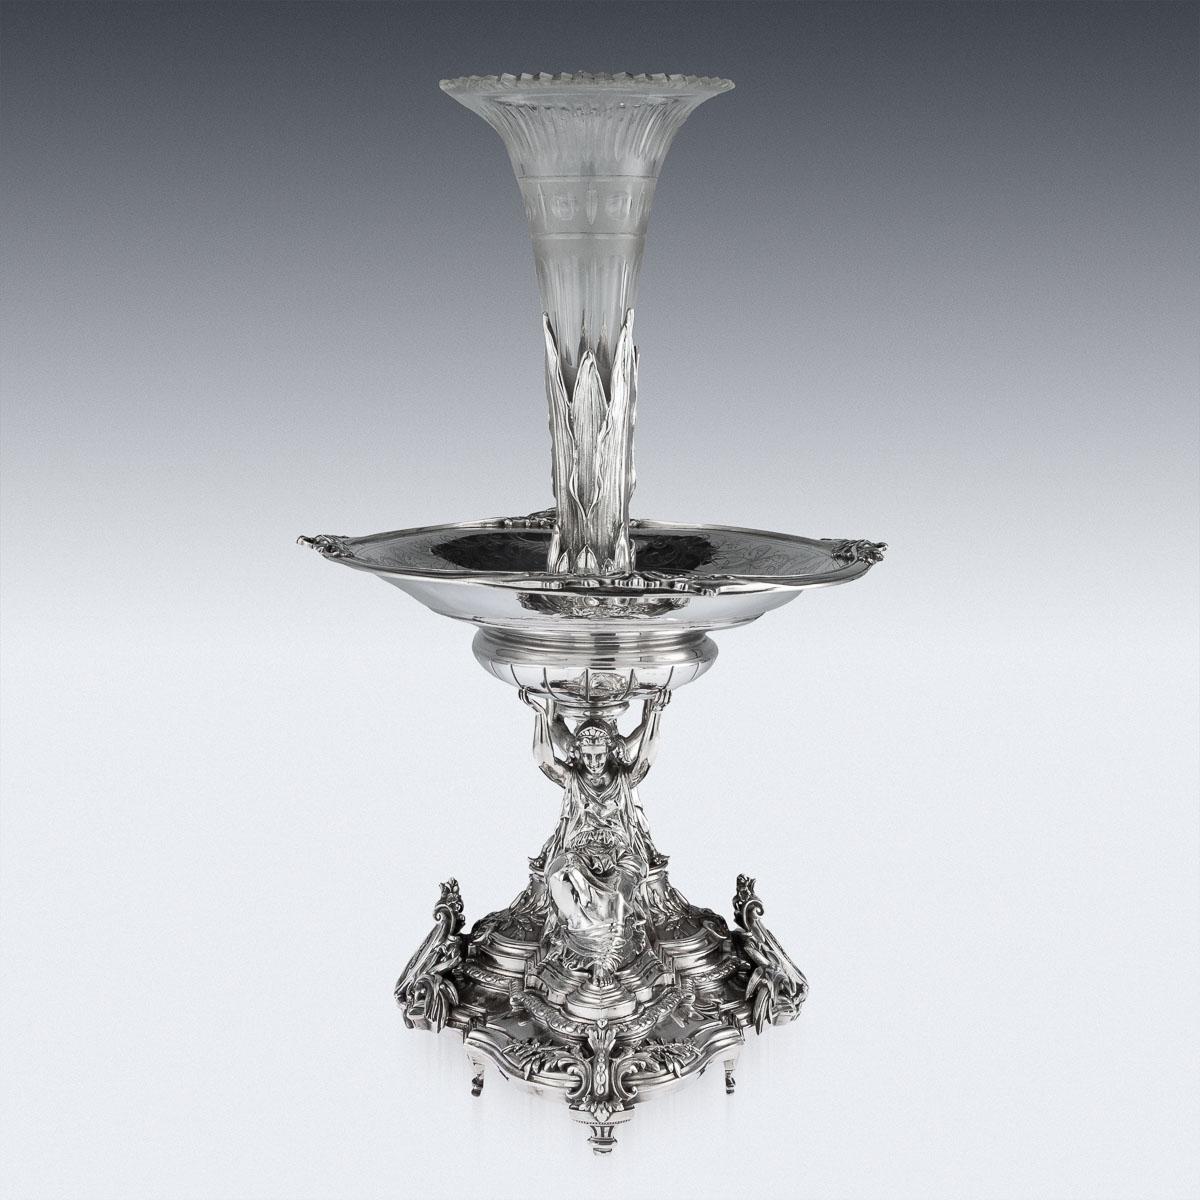 Antique 19th Century French exceptional solid silver figural centerpiece, standing on eight shaped feet, the ornate base is applied with a very crisp scrolling foliate decoration in relief, supporting two large and finely modelled classical female